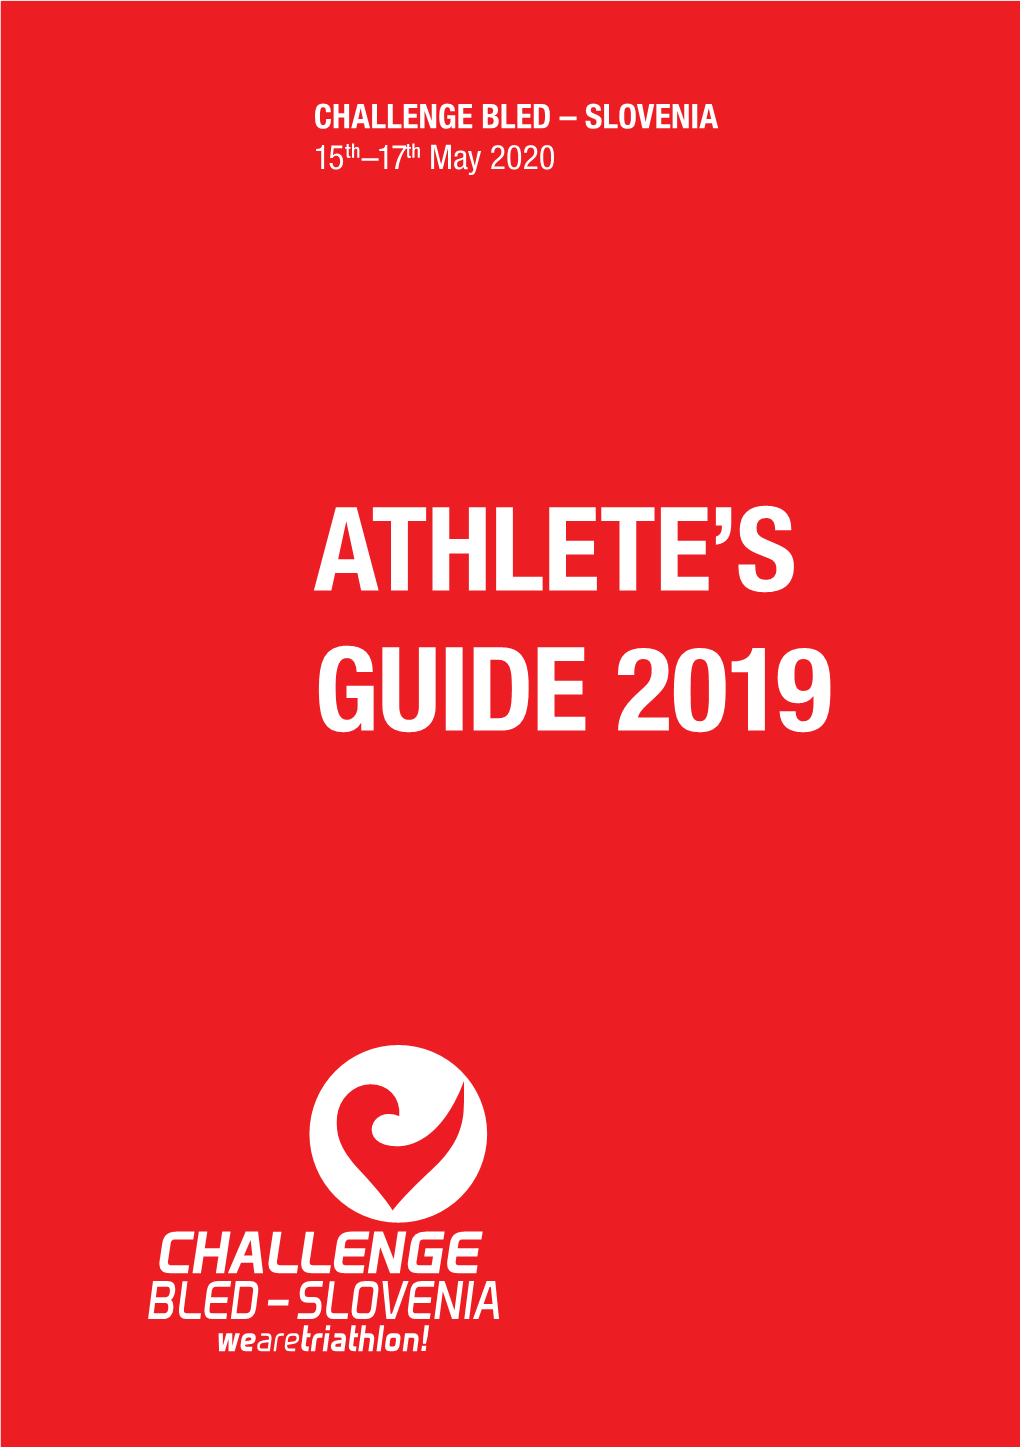 Athlete's Guide 2019